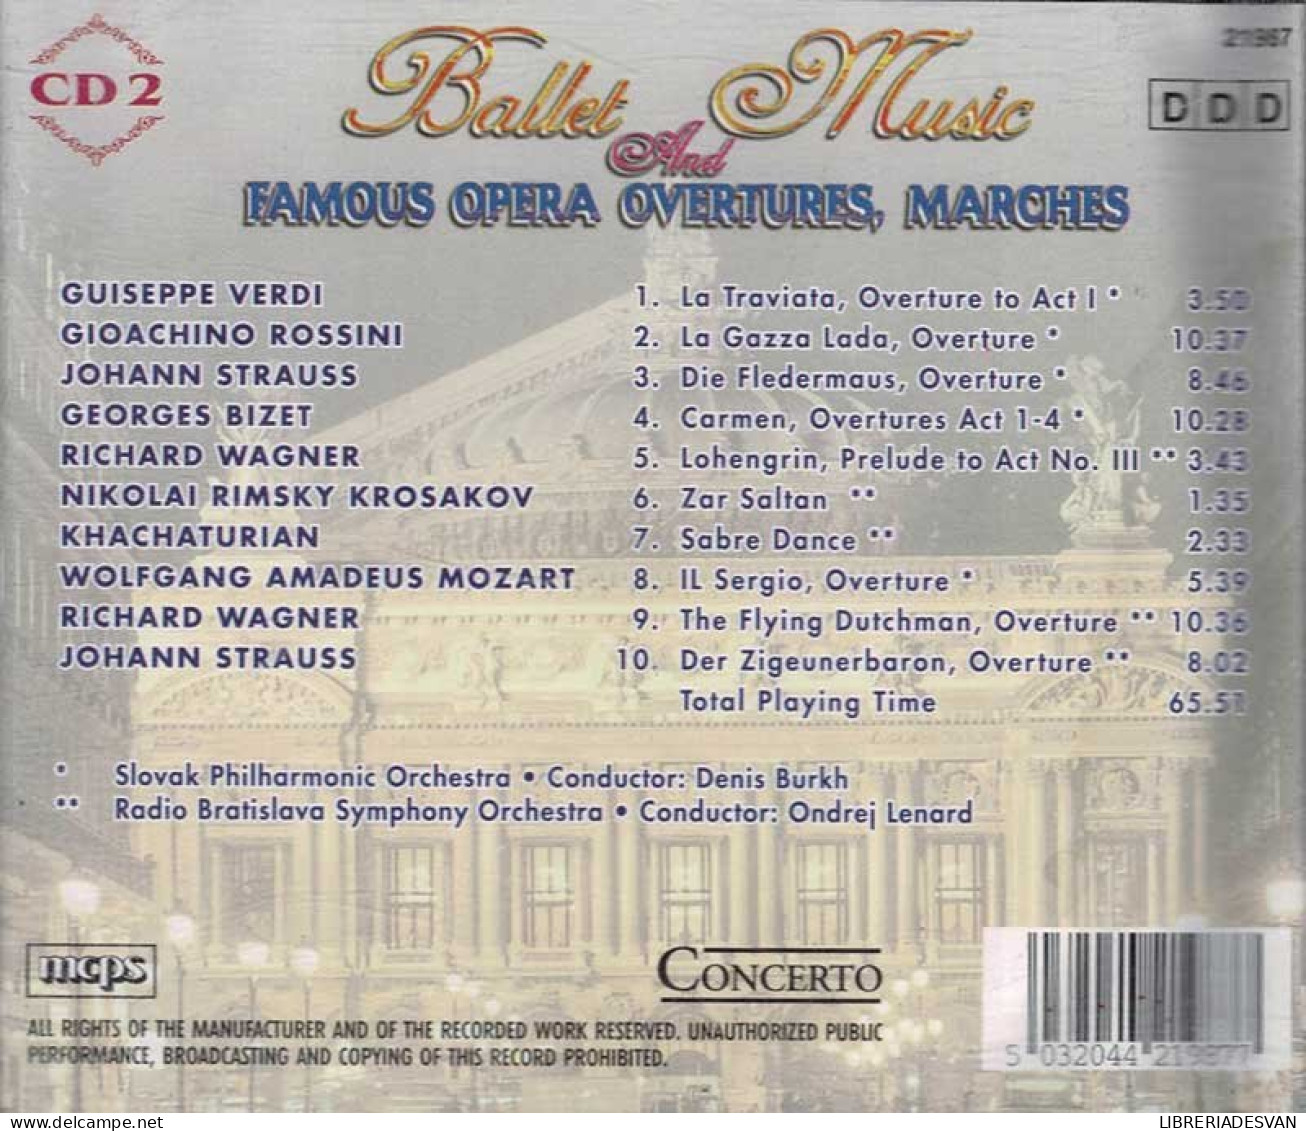 Ballet Music. Famous Opera, Overtures, Marches. CD 2 - Classica